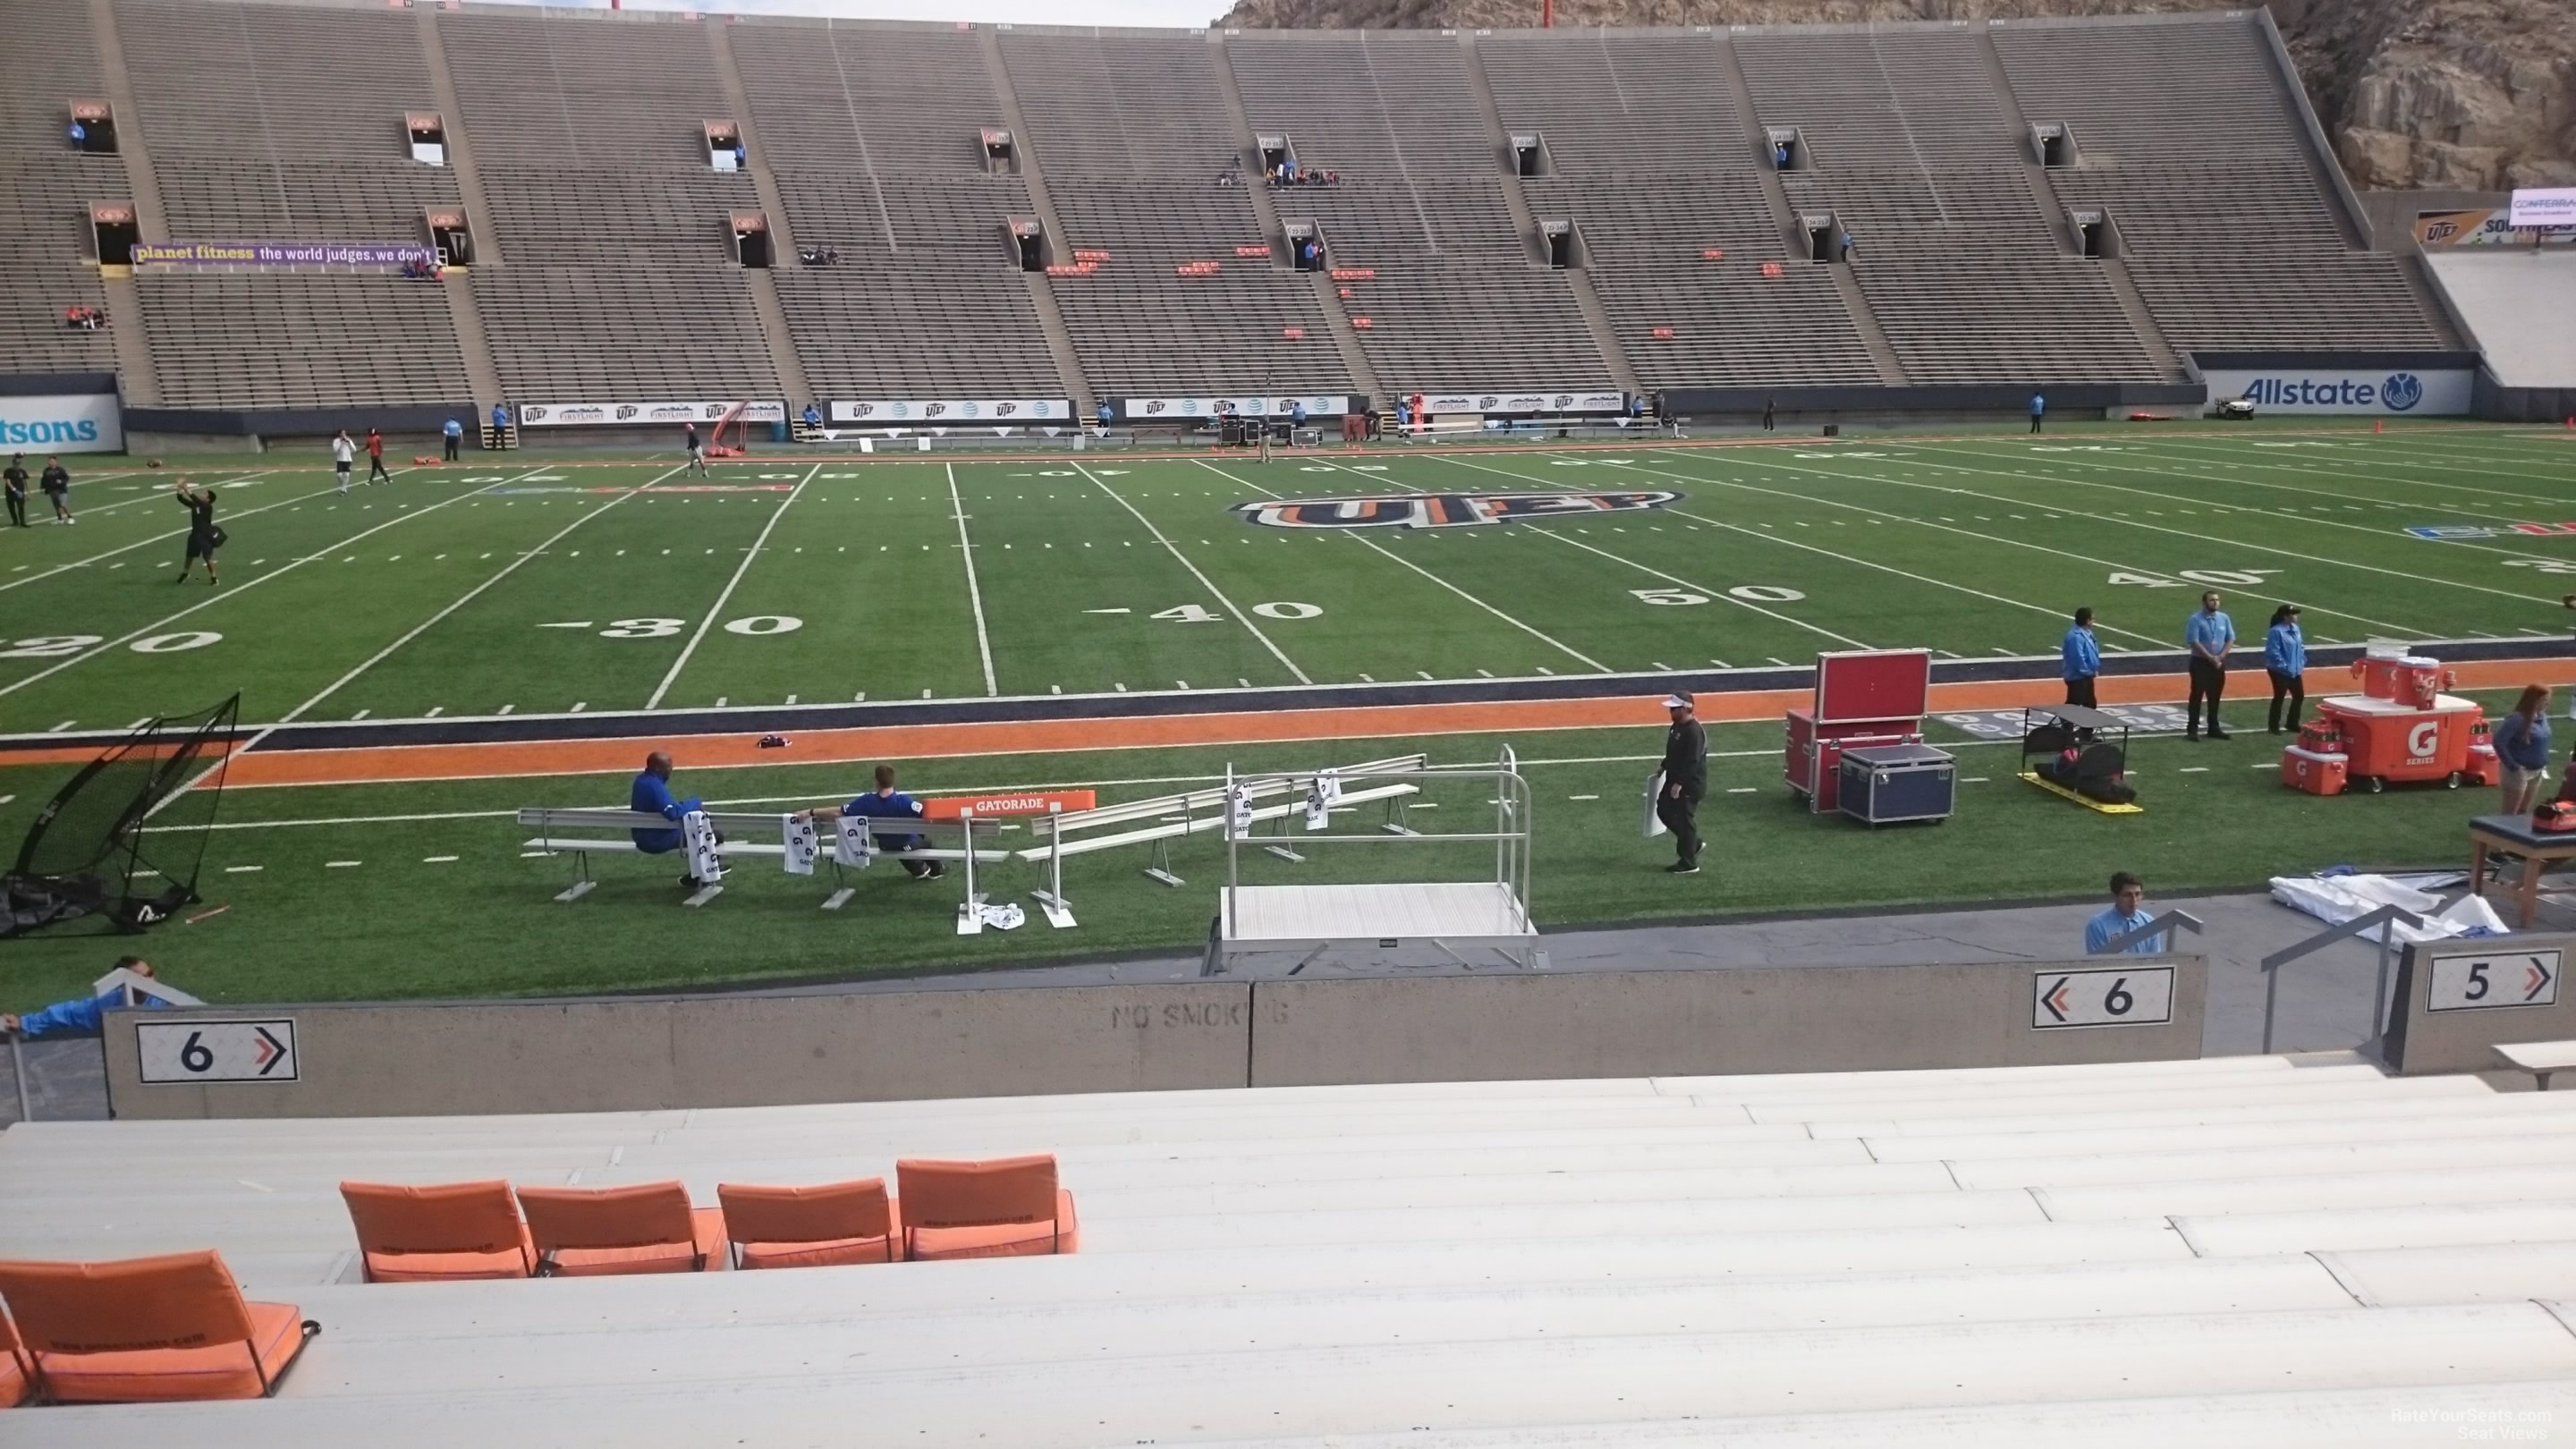 section 6, row 15 seat view  for football - sun bowl